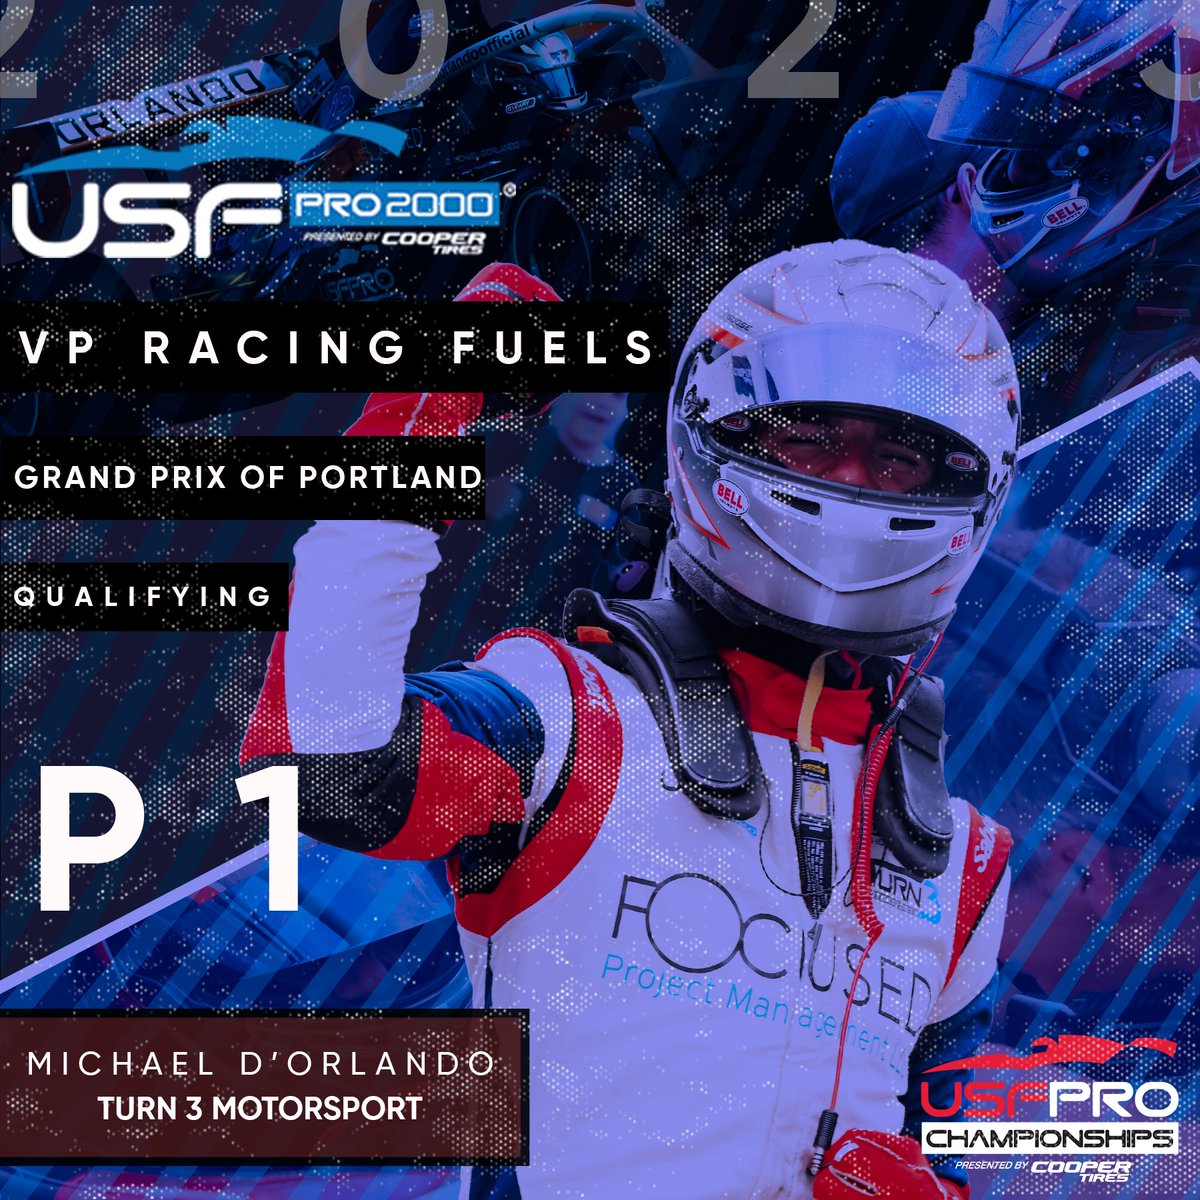 D’ORL4NDO ‼️ Make it 4️⃣ poles for @turn3motorsport’s Michael d’Orlando, now tied with Myles Rowe for the most this season 🔥 The duo are the only two drivers to snag multiple wins and poles in 2023 👀 #USFPro | #TeamCooperTire